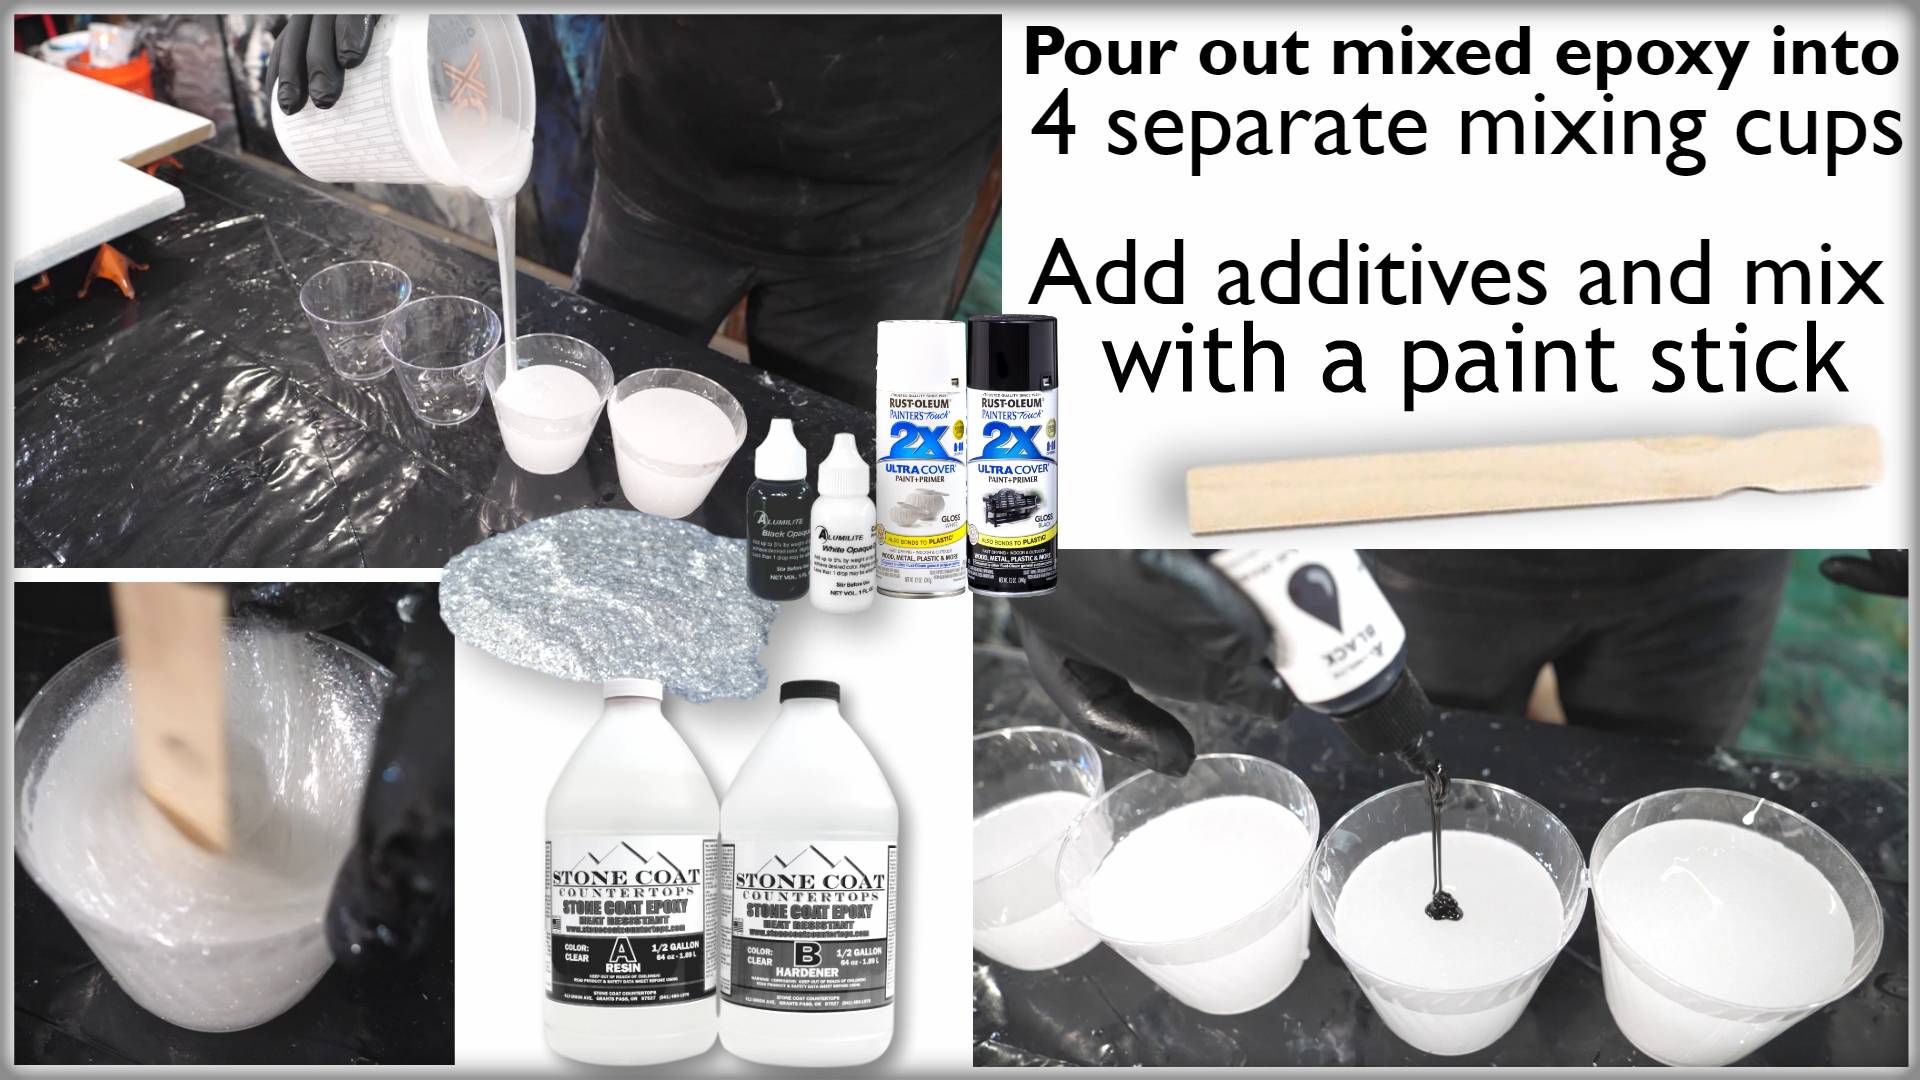 Pour mixed epoxy into 4 separate mixing cups. Add additives and mix with a paint stick.